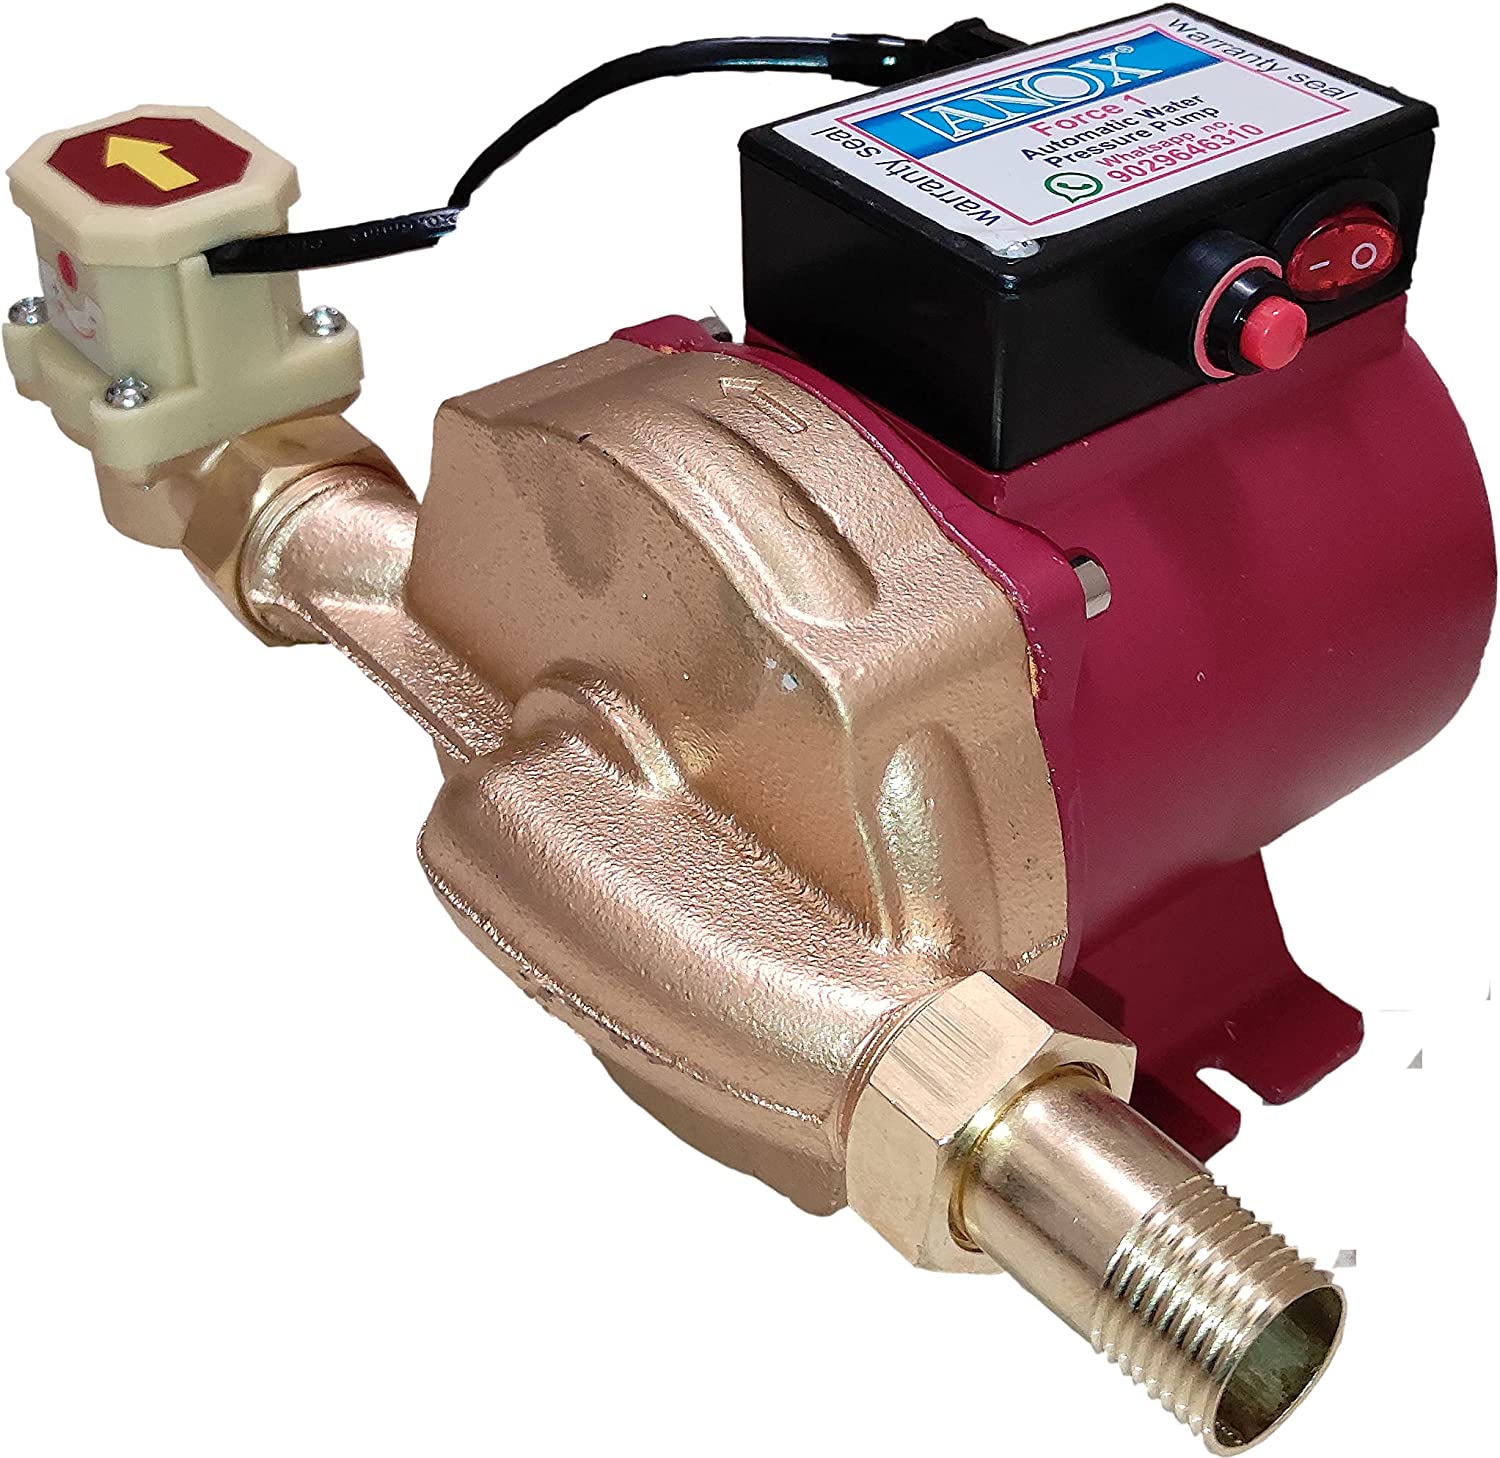 Anox Force 1 Automatic Water Pressure Pump